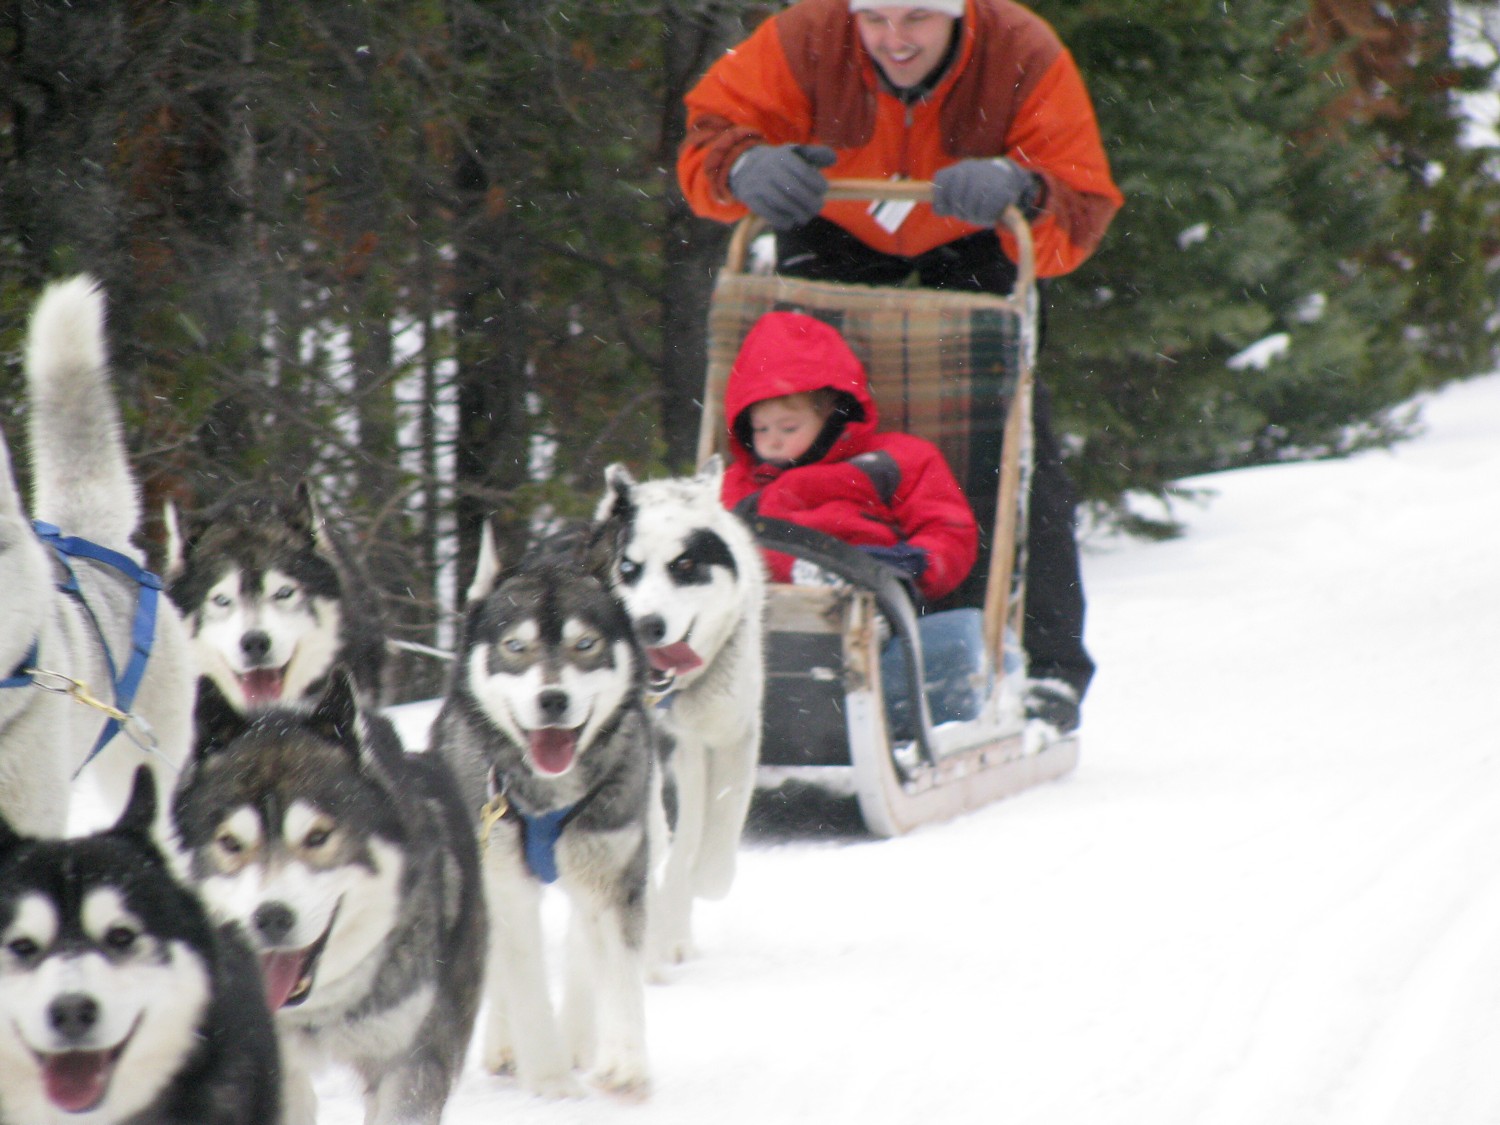 Ski.com can help you choose and get the best deals at 120 different resorts, like Breckenridge, one of the top trending resorts this season, and book special events, such as dog-sledding (photo by Eric Leiberman/Travel Features Syndicate)